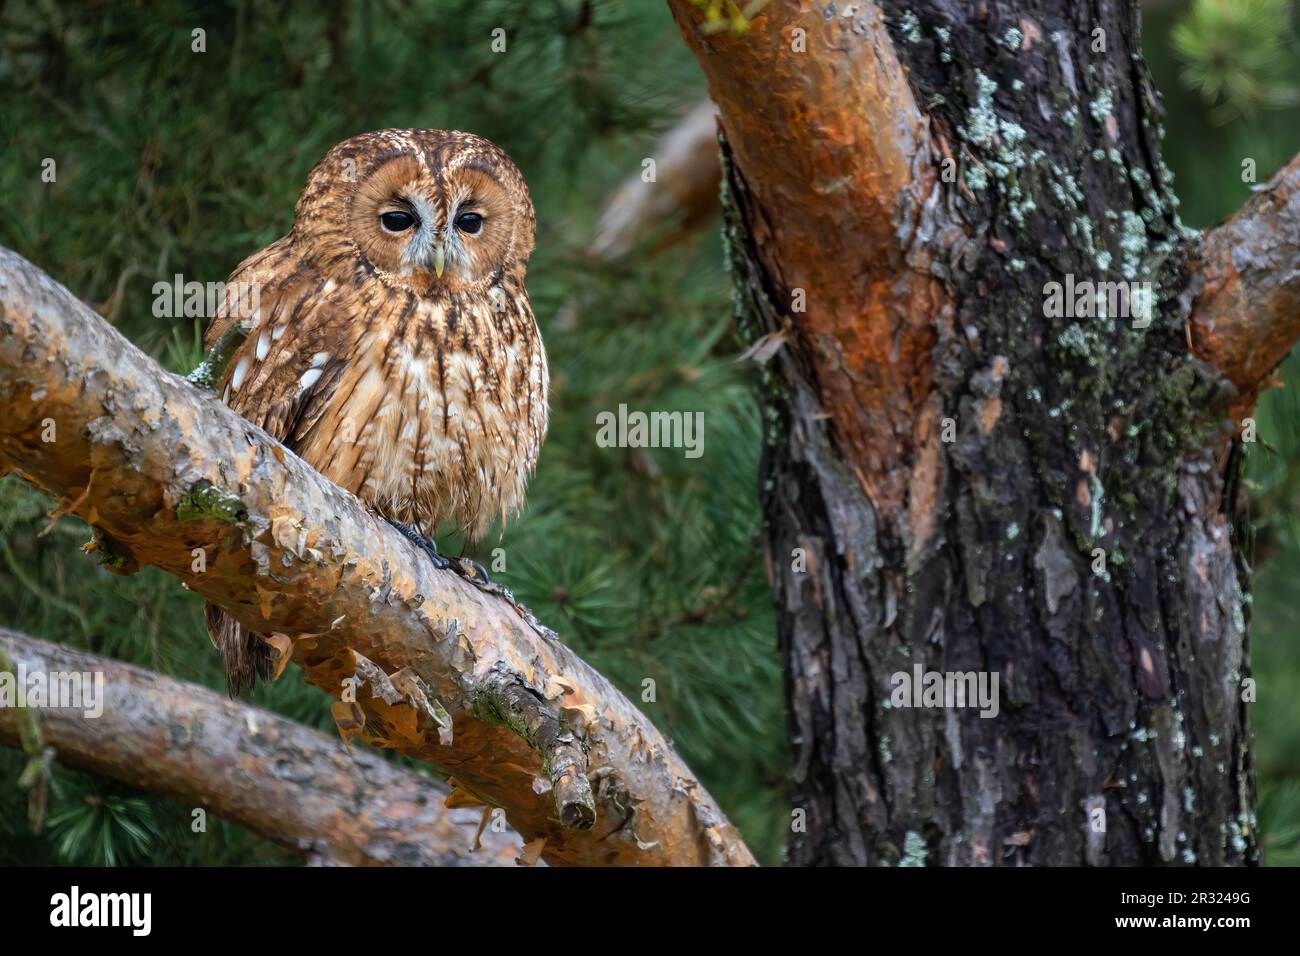 Tawny Owl - Strix aluco, beatiful common owl from Euroasian forests and woodlands, Czech Republic. Stock Photo